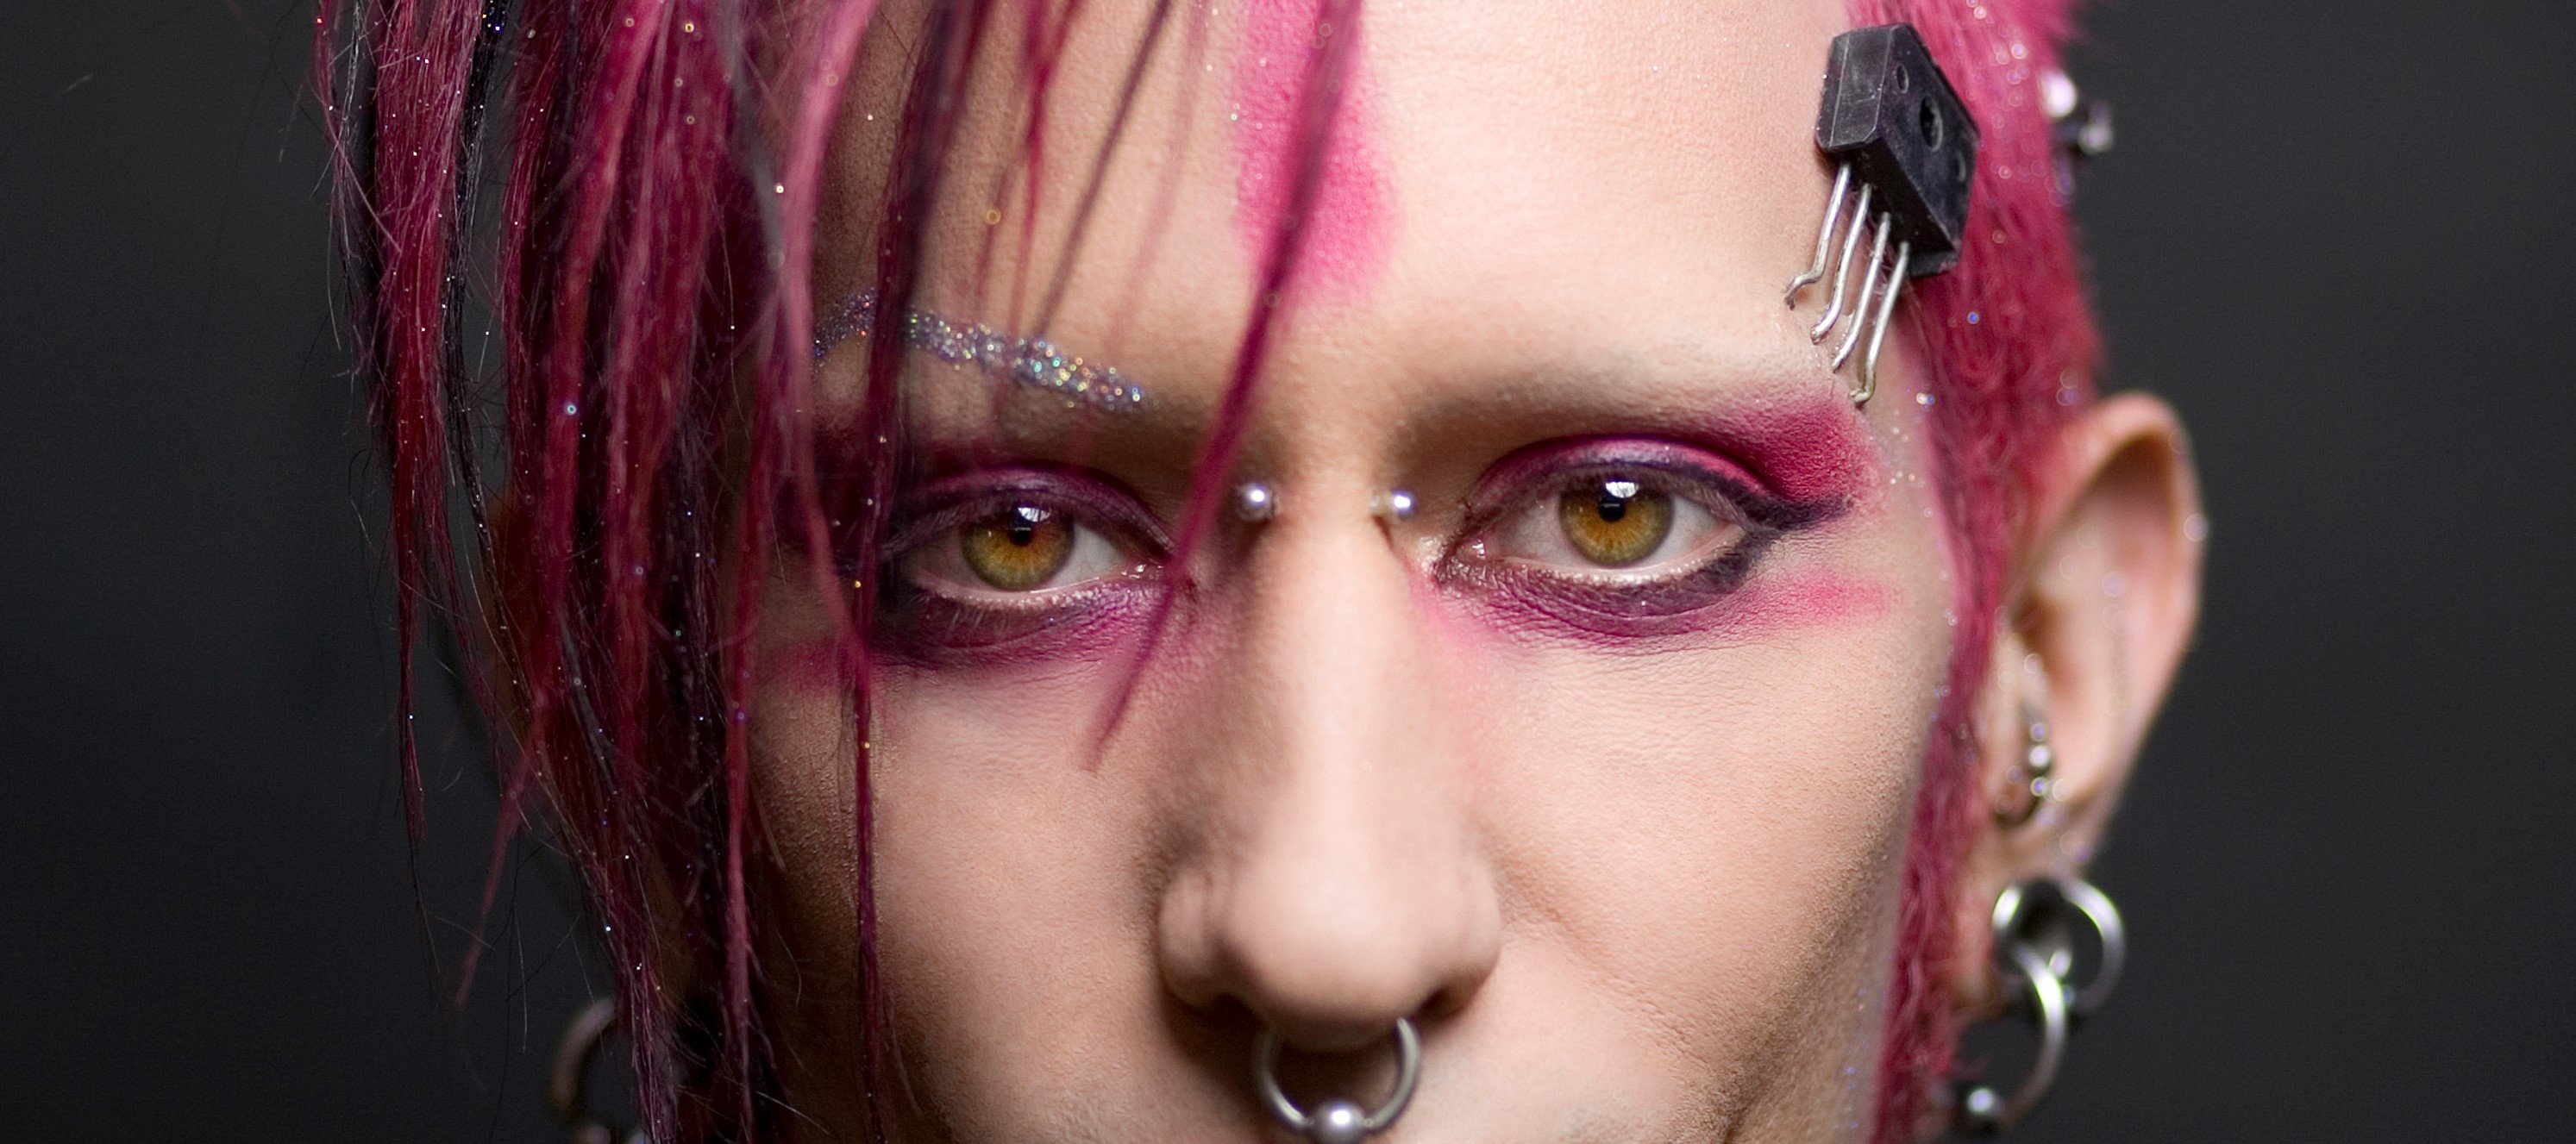 Person with bridge piercing | Source: Getty Images